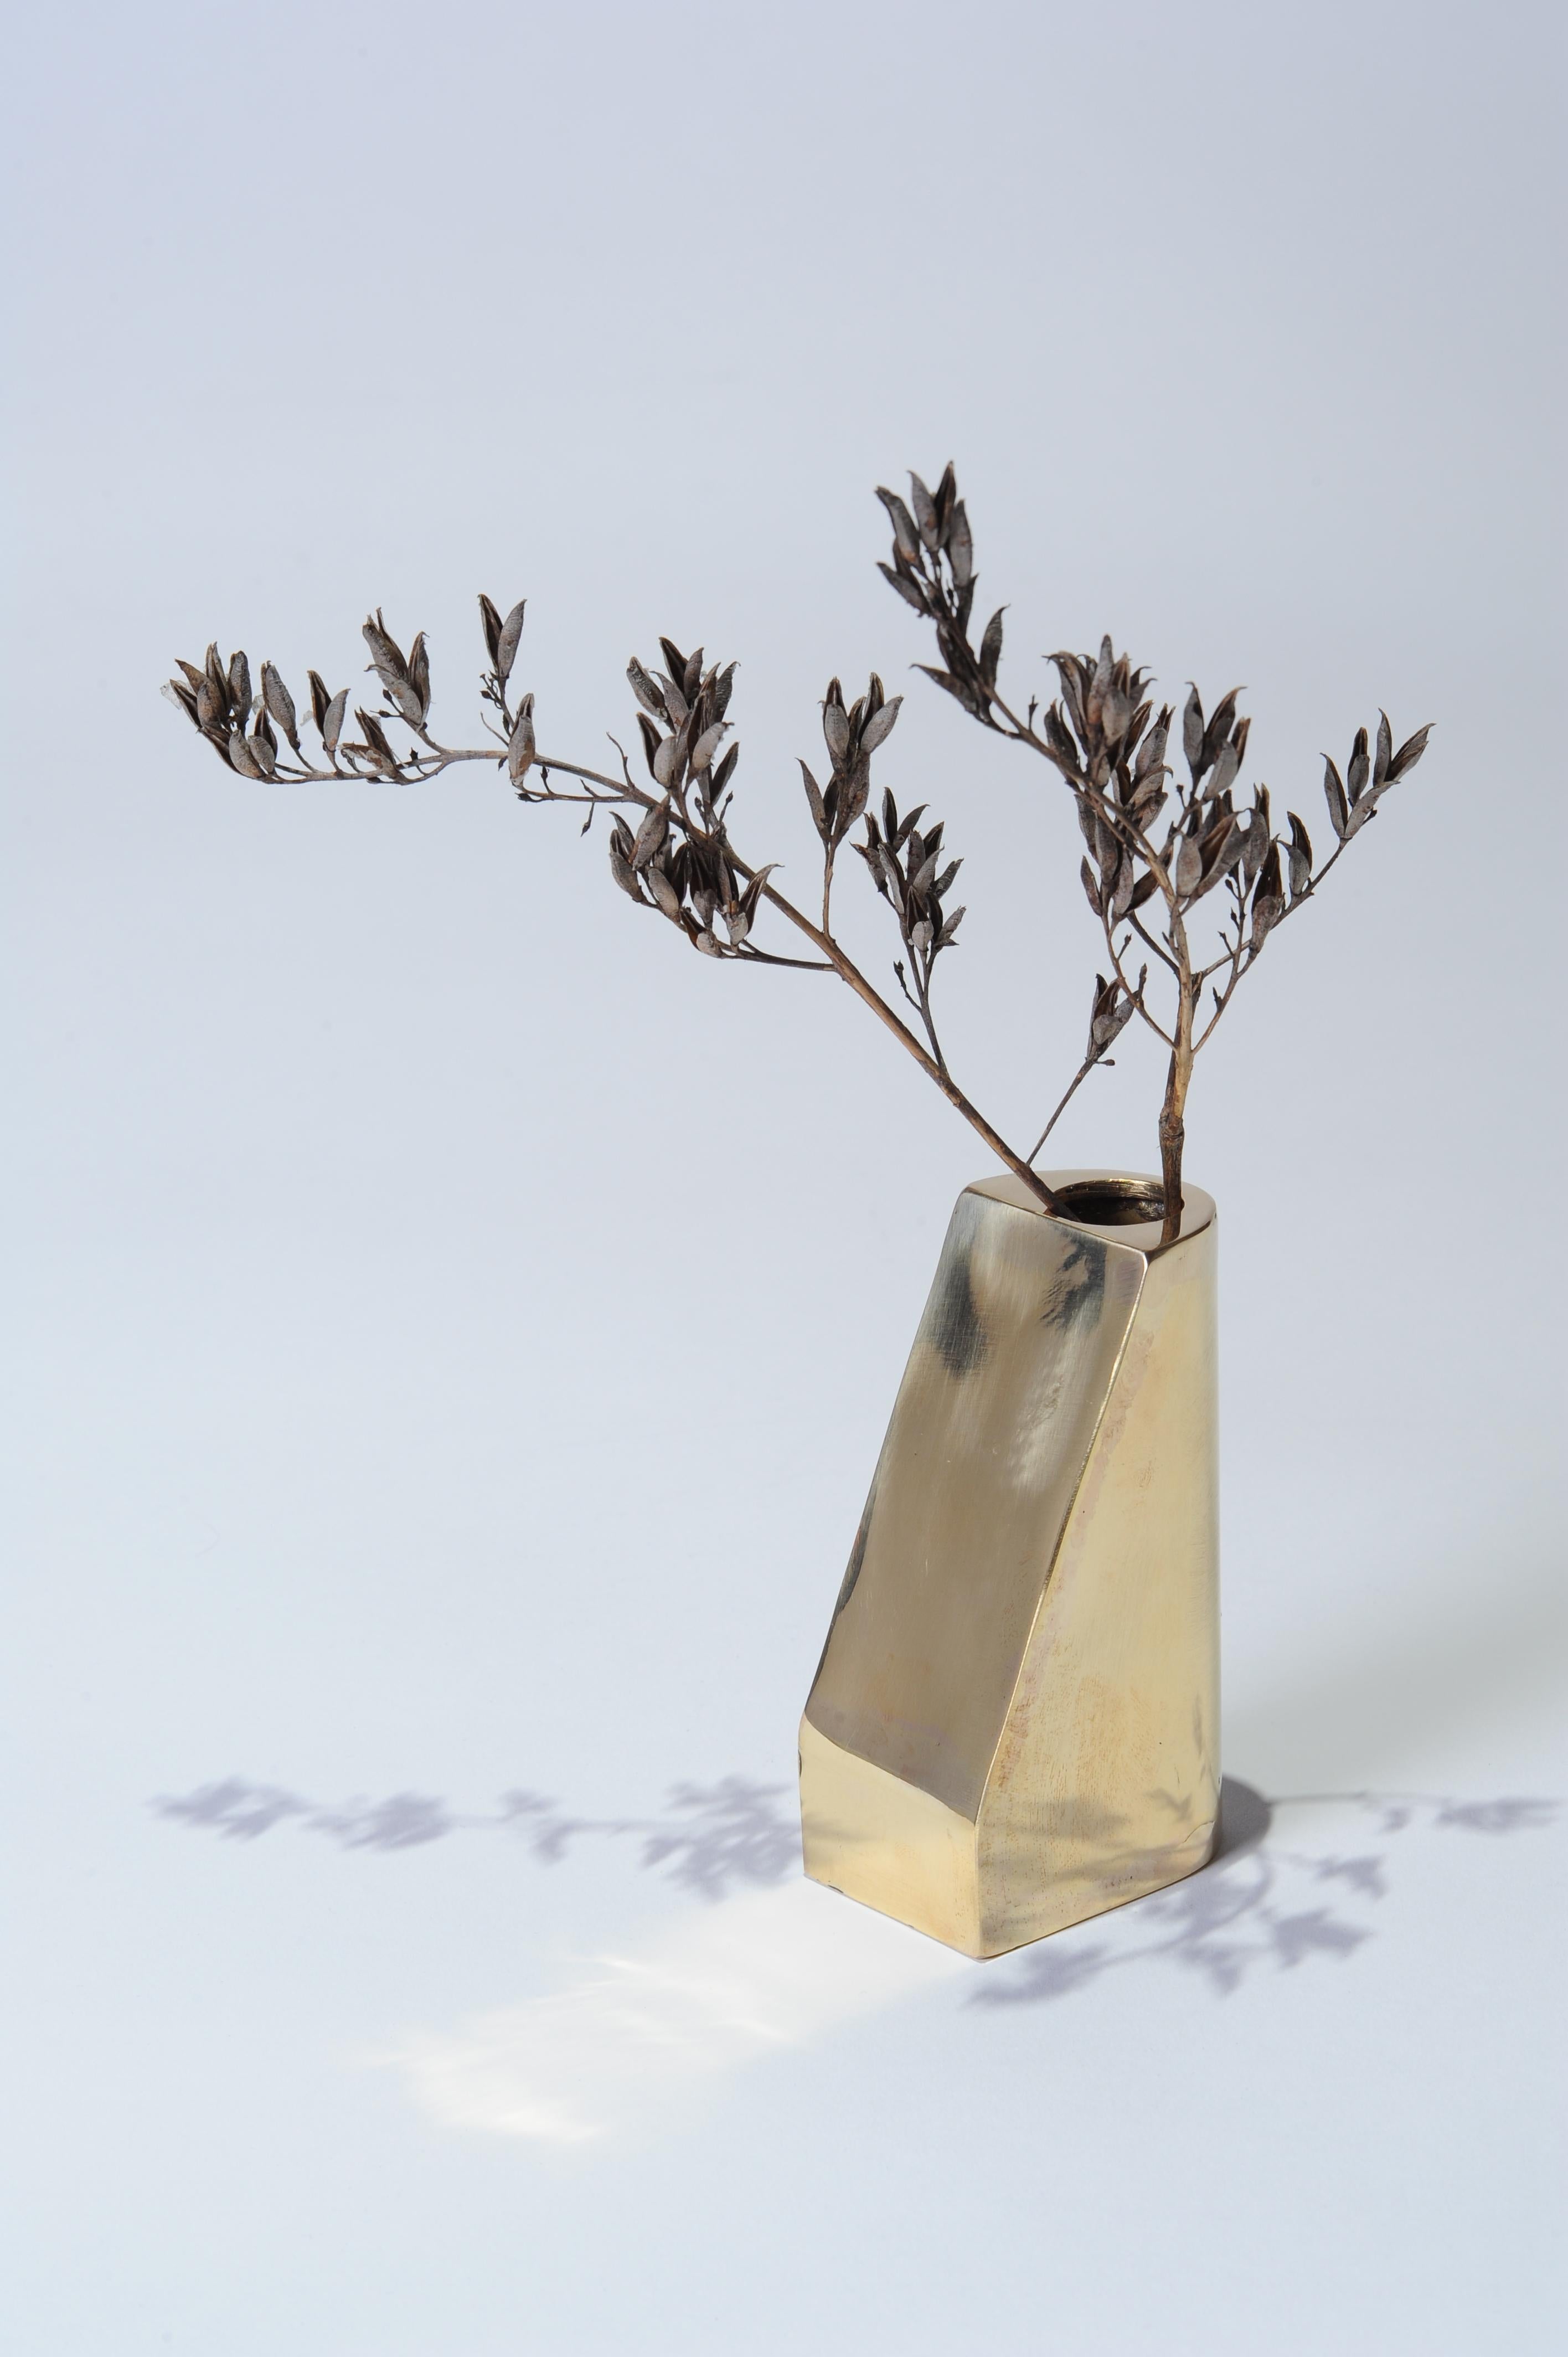 Unique brass vase, hand-sculpted and signed by Lukasz Friedrich.
Brass vase, 2020.
Patinated and polished brass.
Dimensions:
H 10 cm
W 6 cm
D 4 cm
Signed and dated.